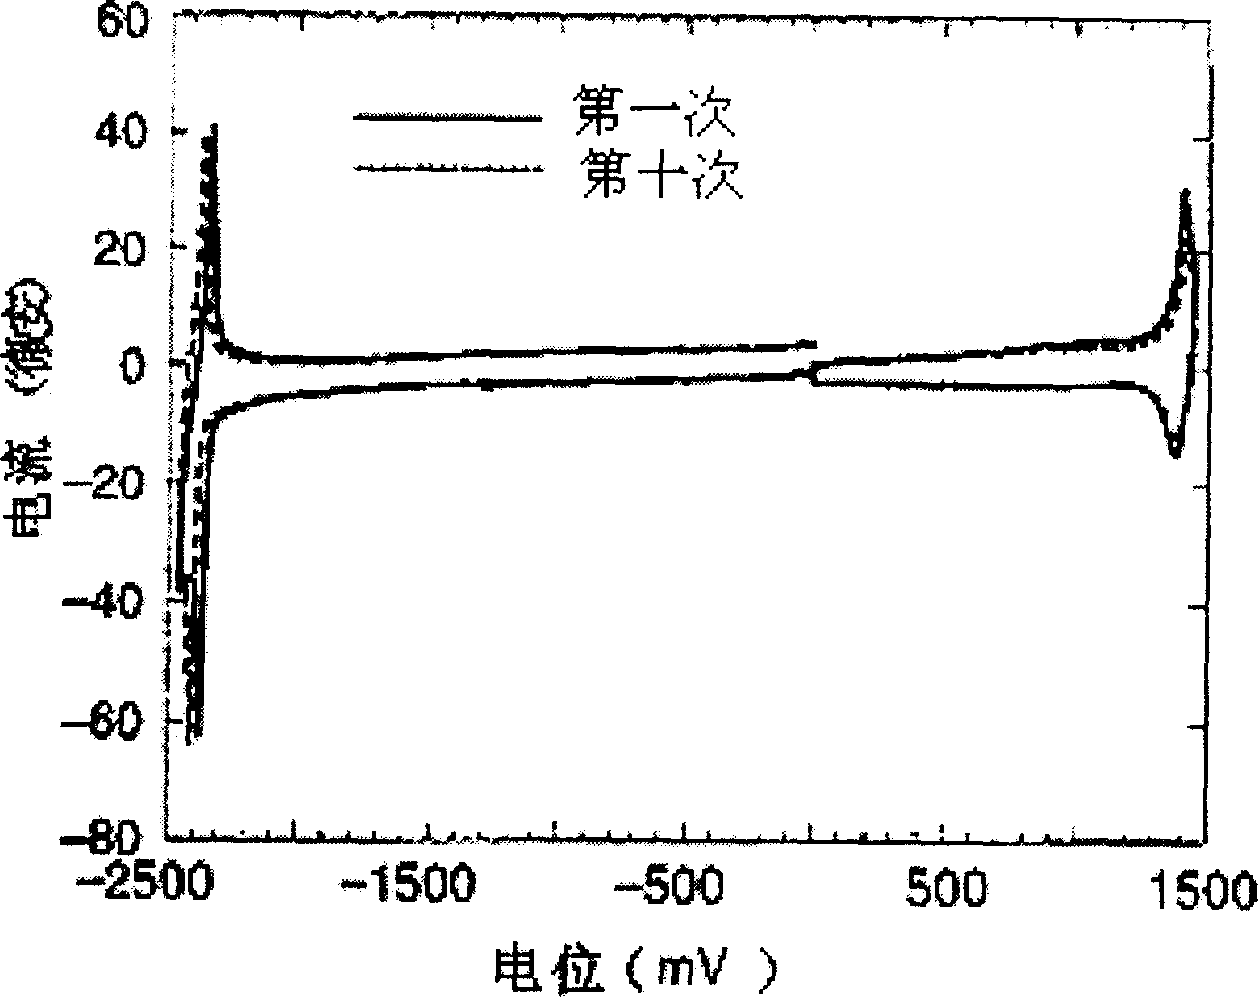 Organic electronic material containing hindered amine group and spiro structure unit and its synthesis process